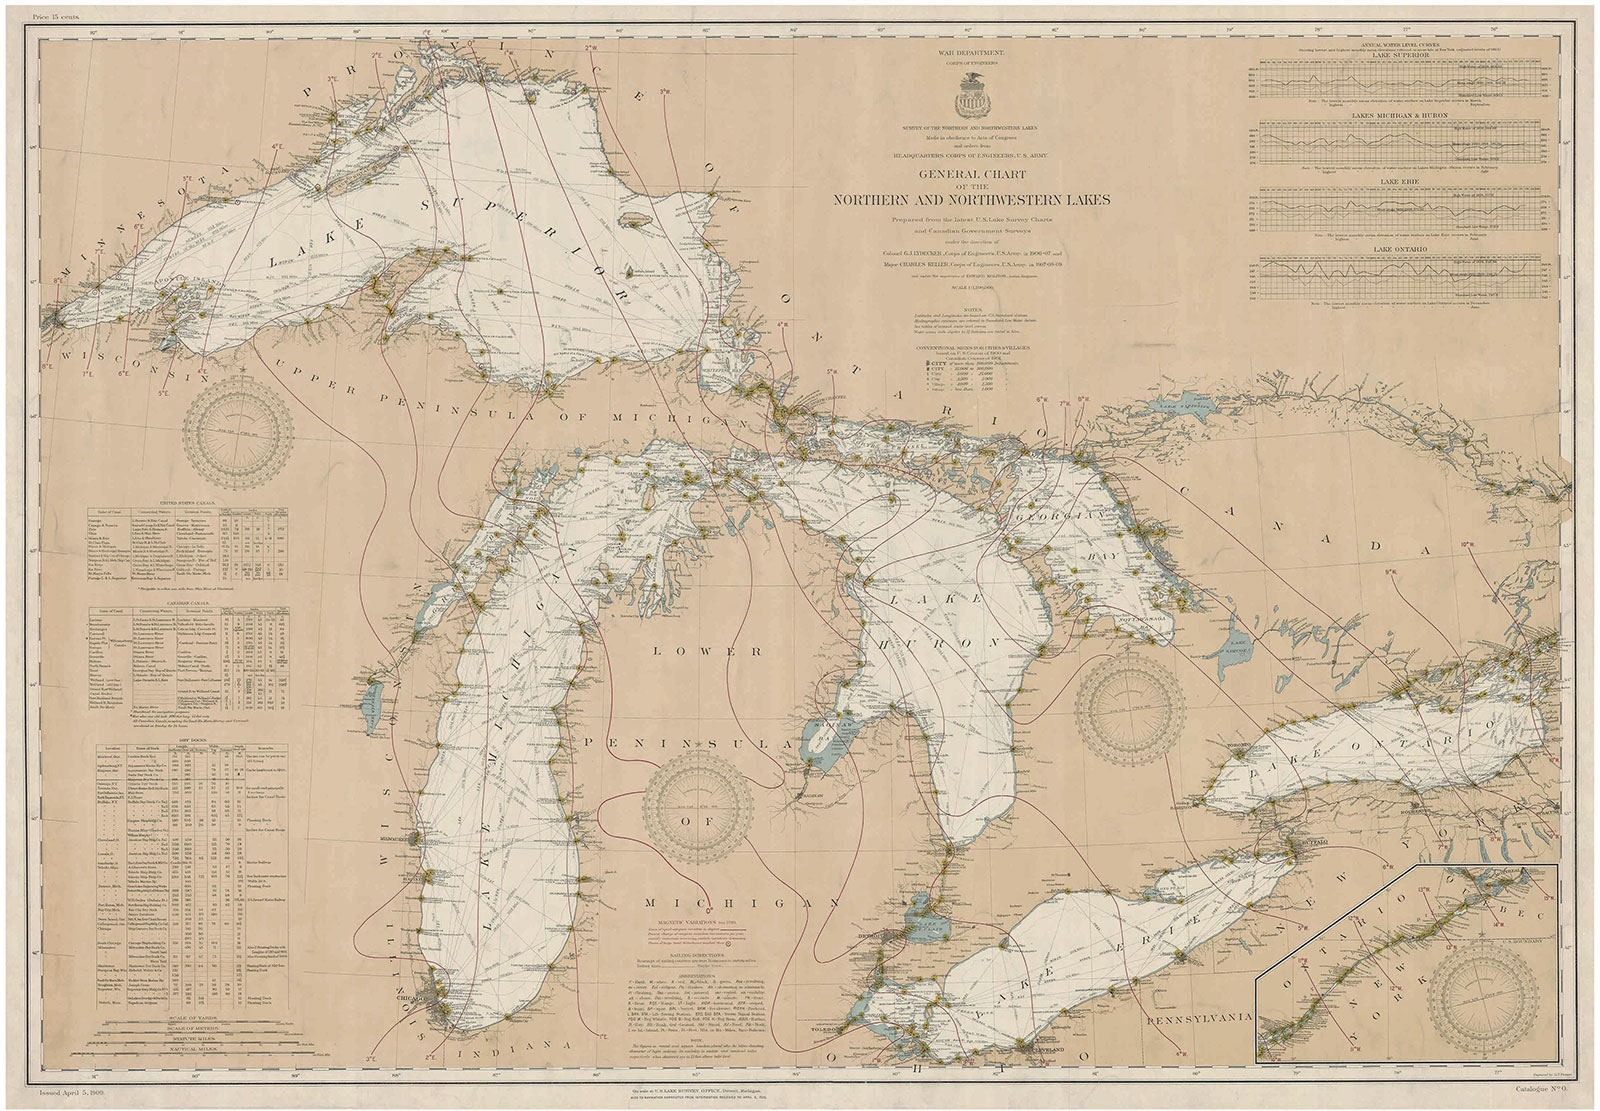 A 1909 nautical chart of the Great Lakes